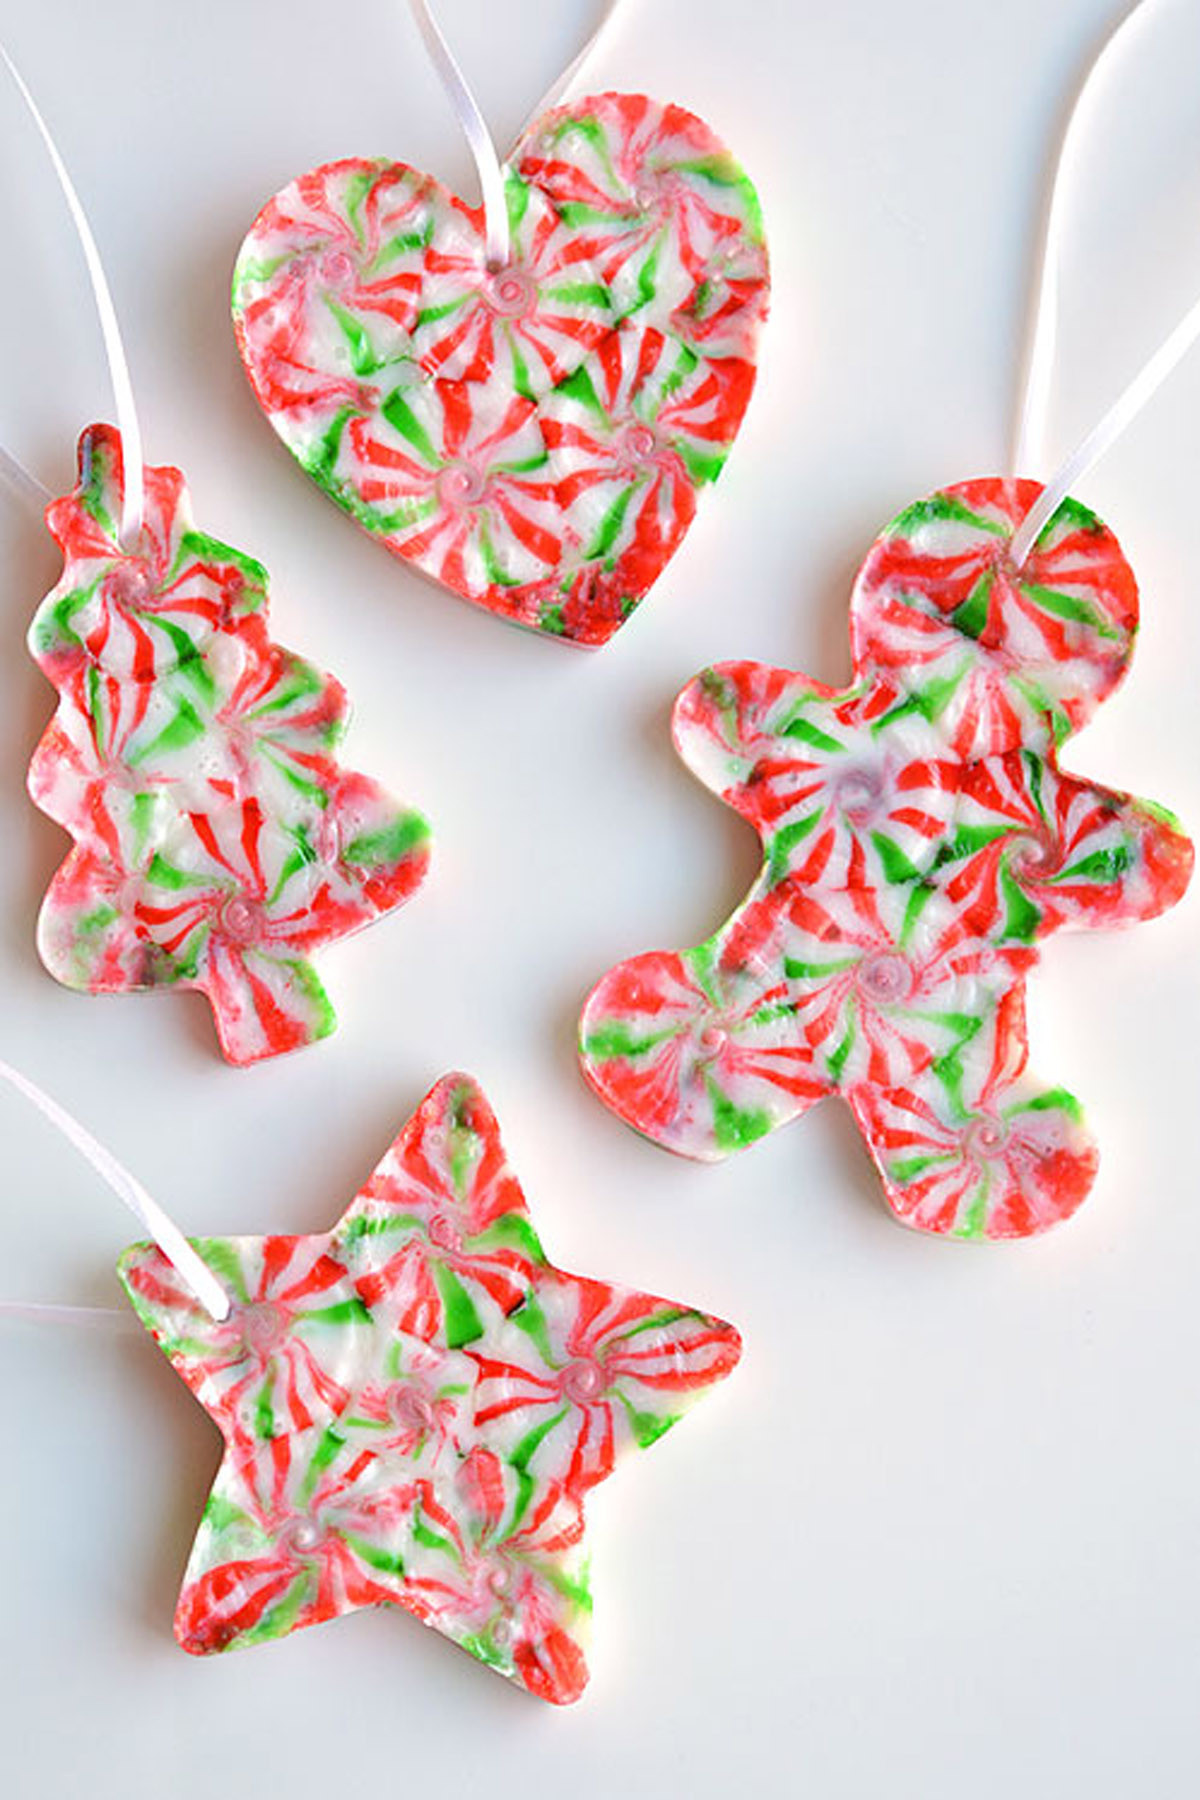 Candy Christmas Ornaments
 55 Easy Christmas Crafts Simple DIY Holiday Craft Ideas